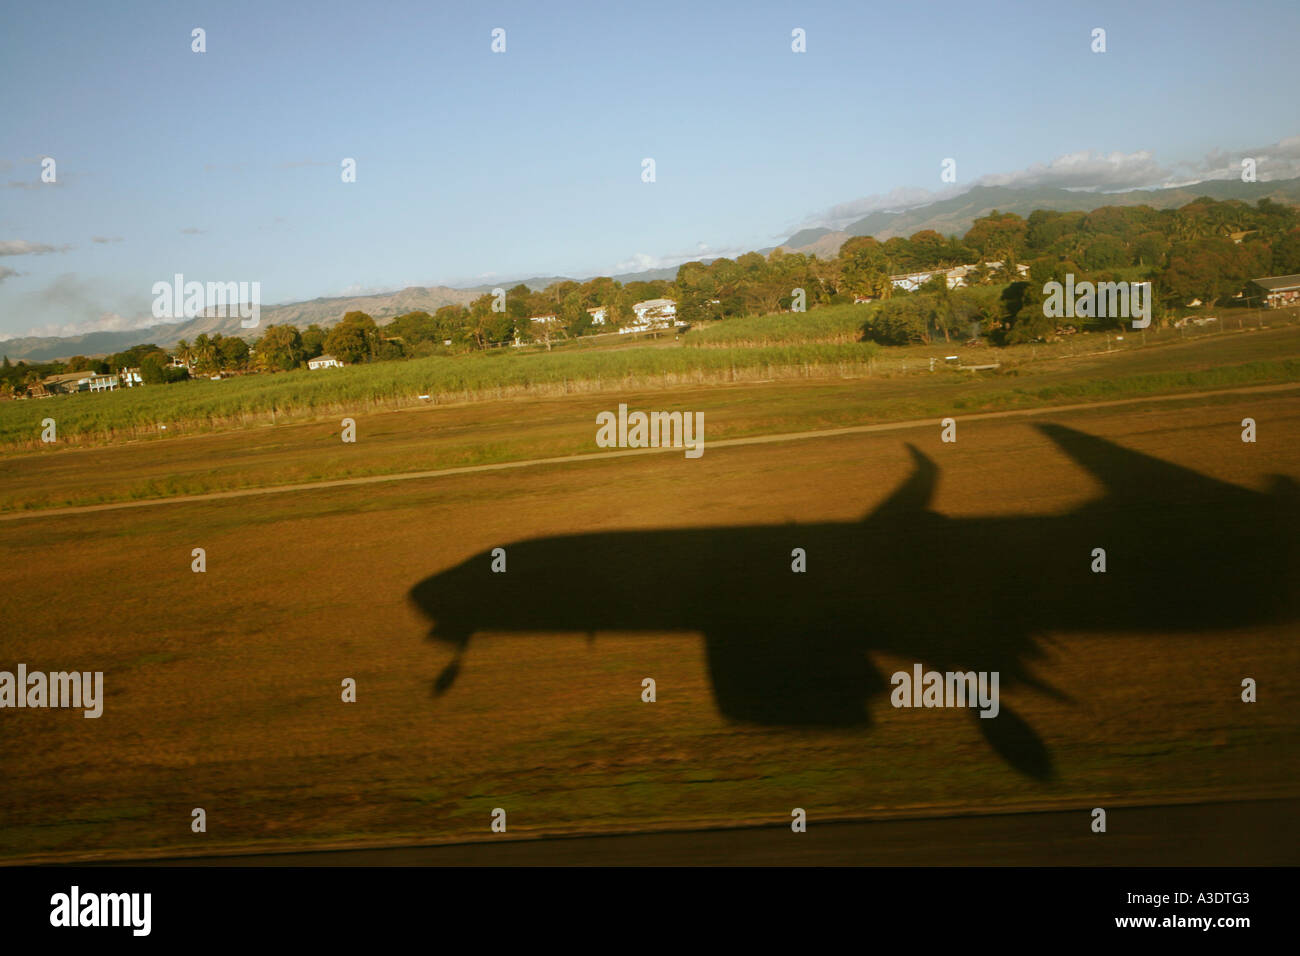 Shadow of Boeing 737-800 airliner coming in to land at Nadi Airport, Fiji, sugar cane fields beside runway Stock Photo